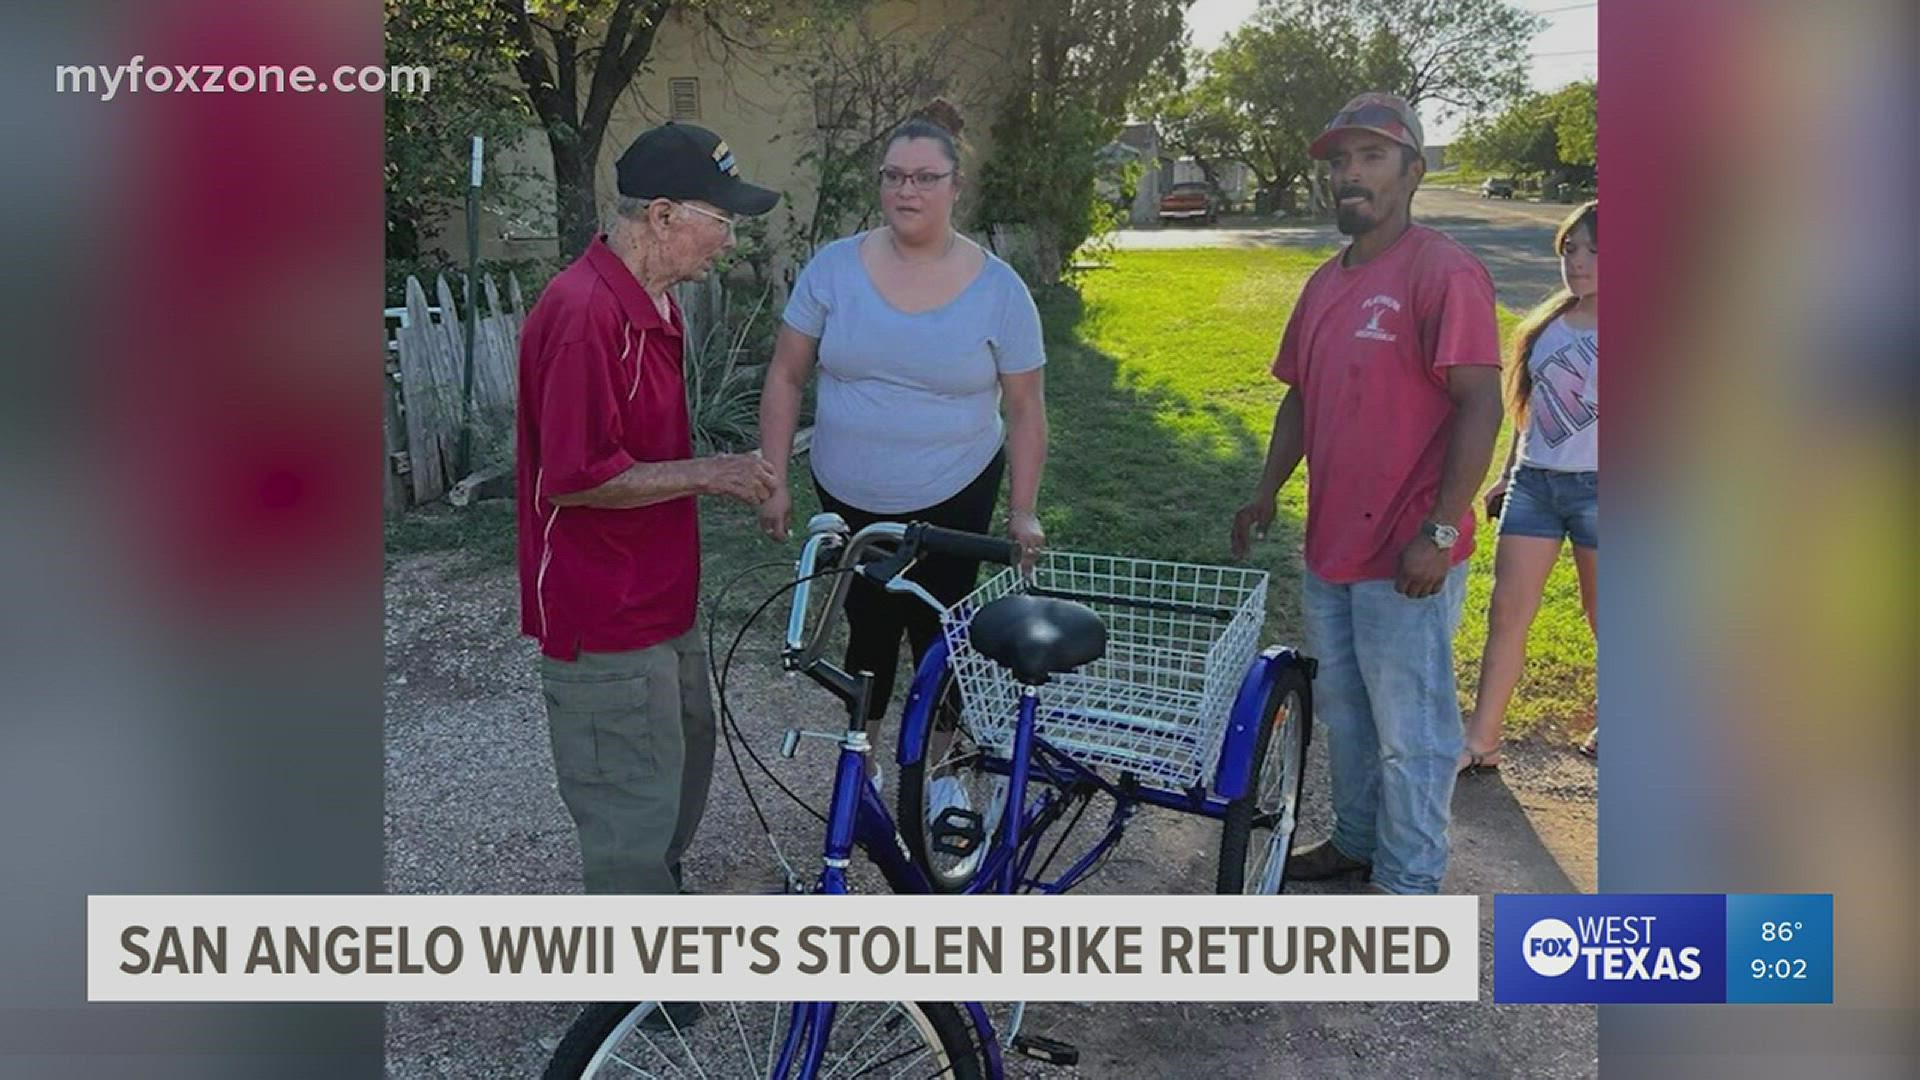 A couple who had seen a post on social media about the stolen bike saw a man riding it in San Angelo. They jumped into action and got David Silvas' bike back.